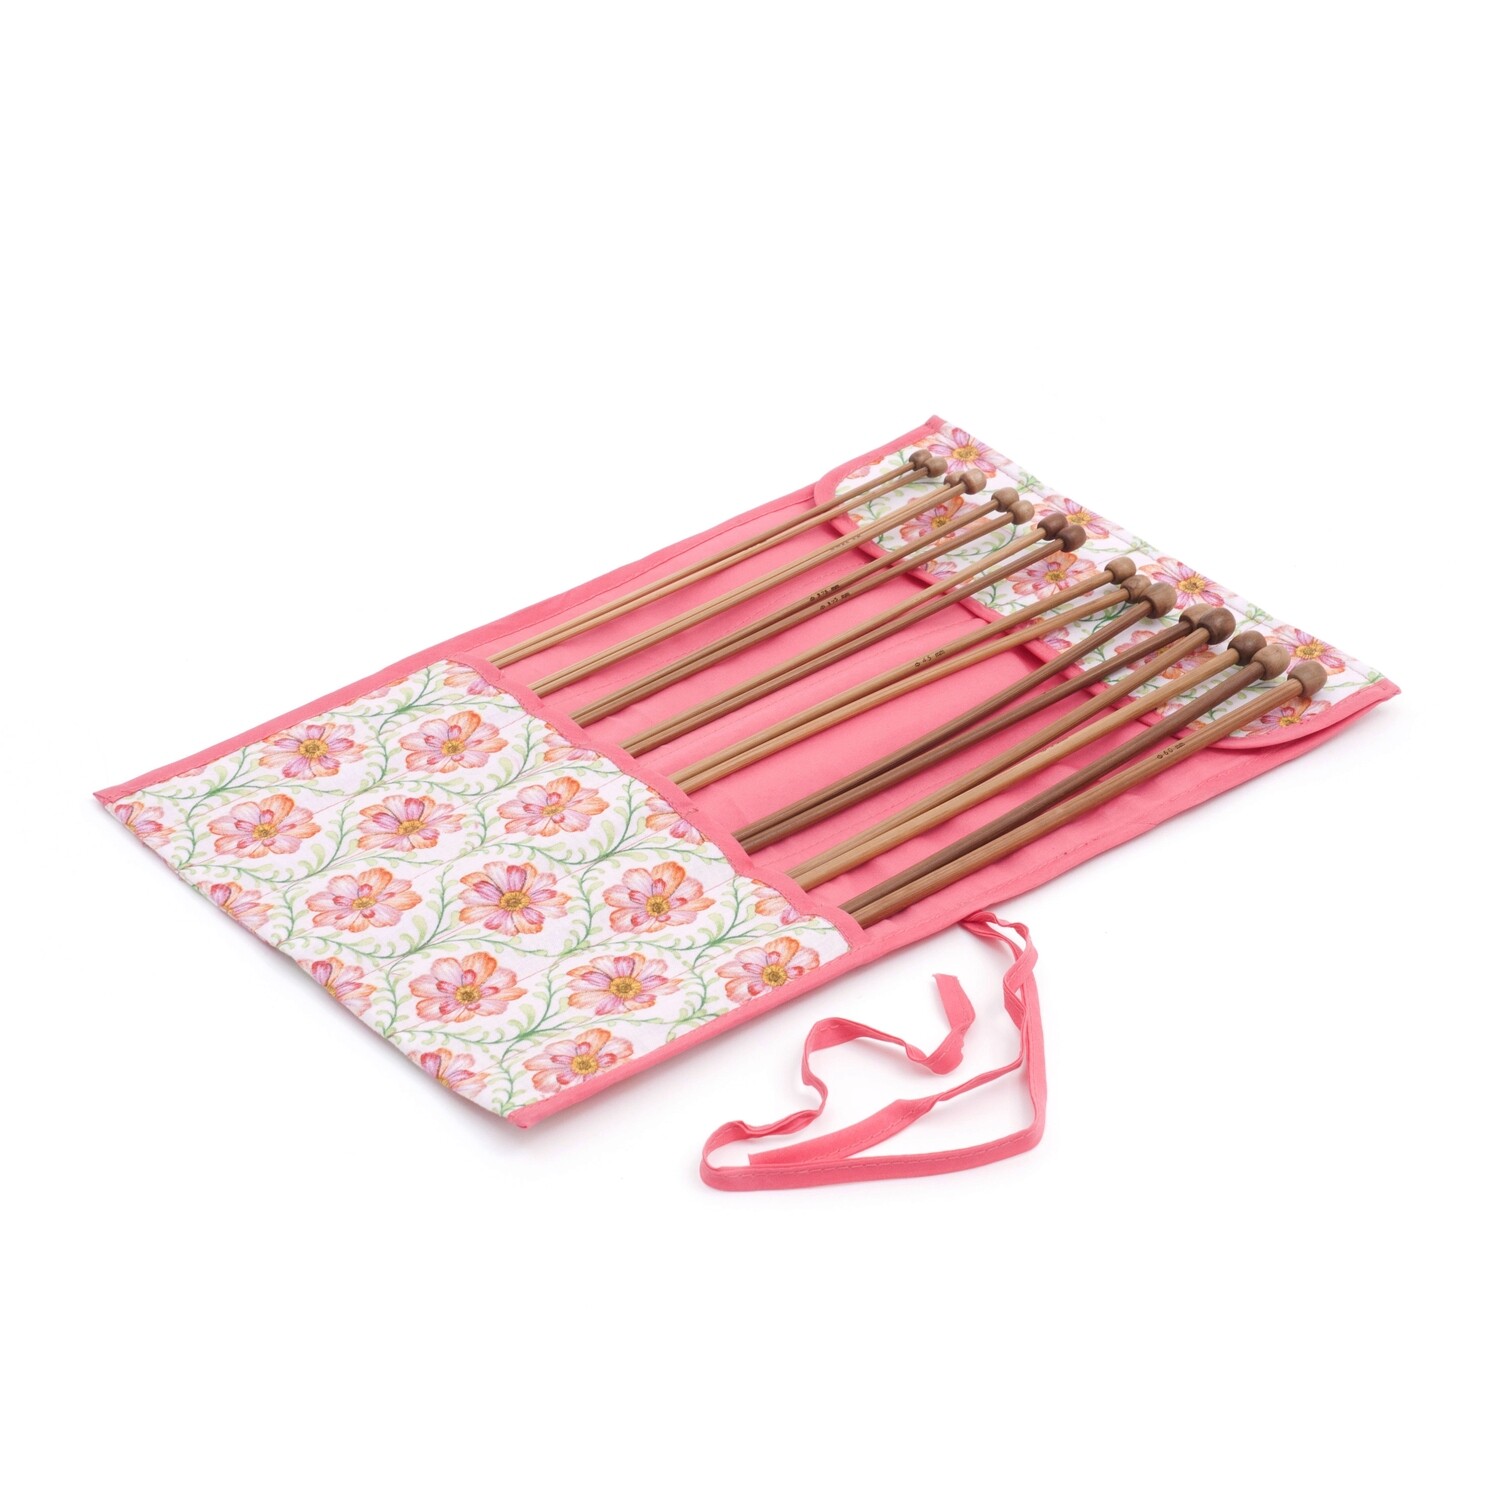 Wooden Knitting Needles in Cloth Roll